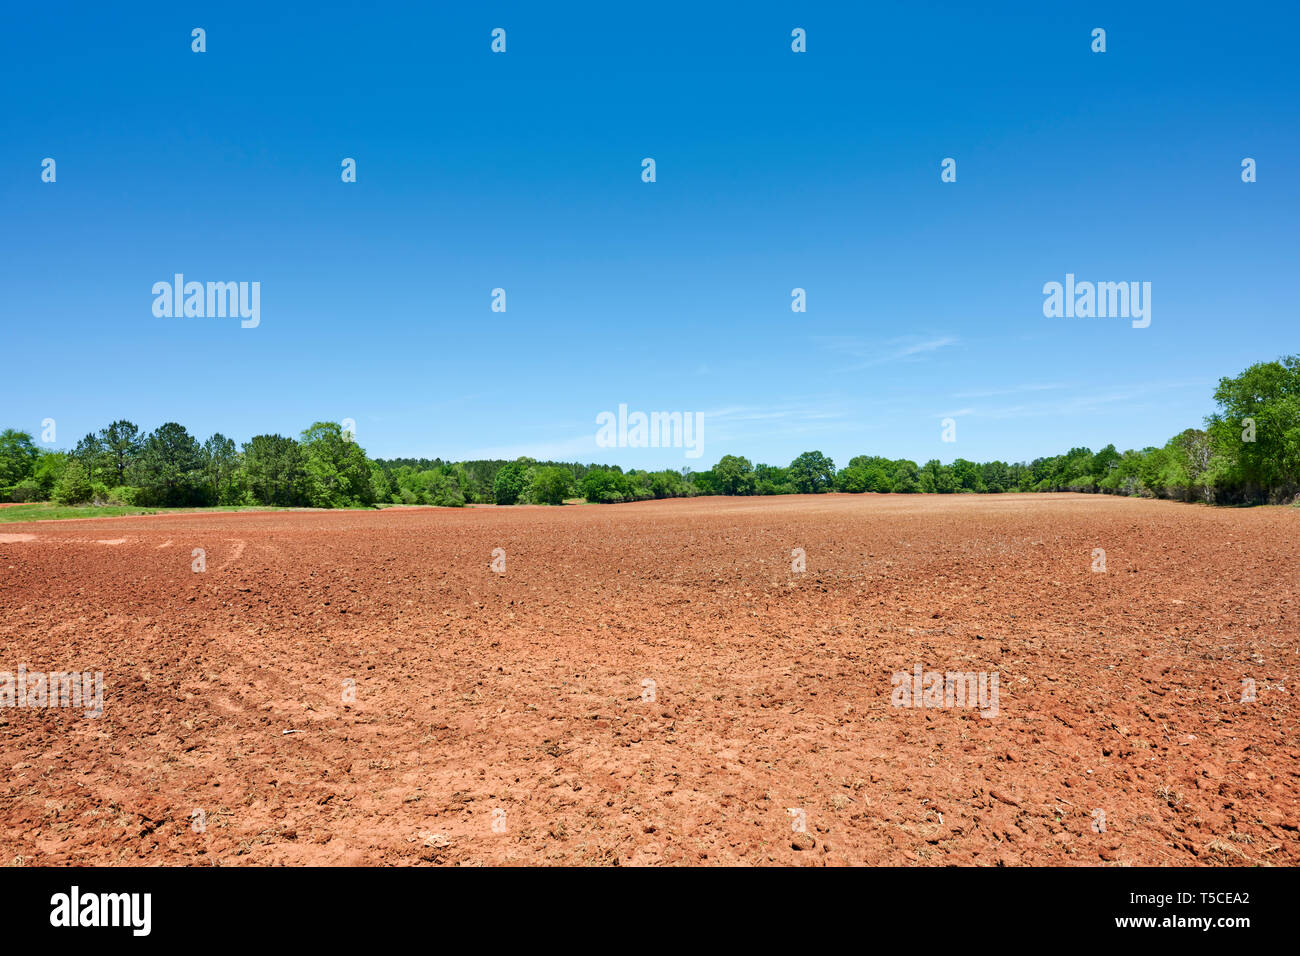 Freshly and evenly tilled field of red clay ready for planting in the cotton belt of Alabama or Georgia in the USA Stock Photo - Alamy